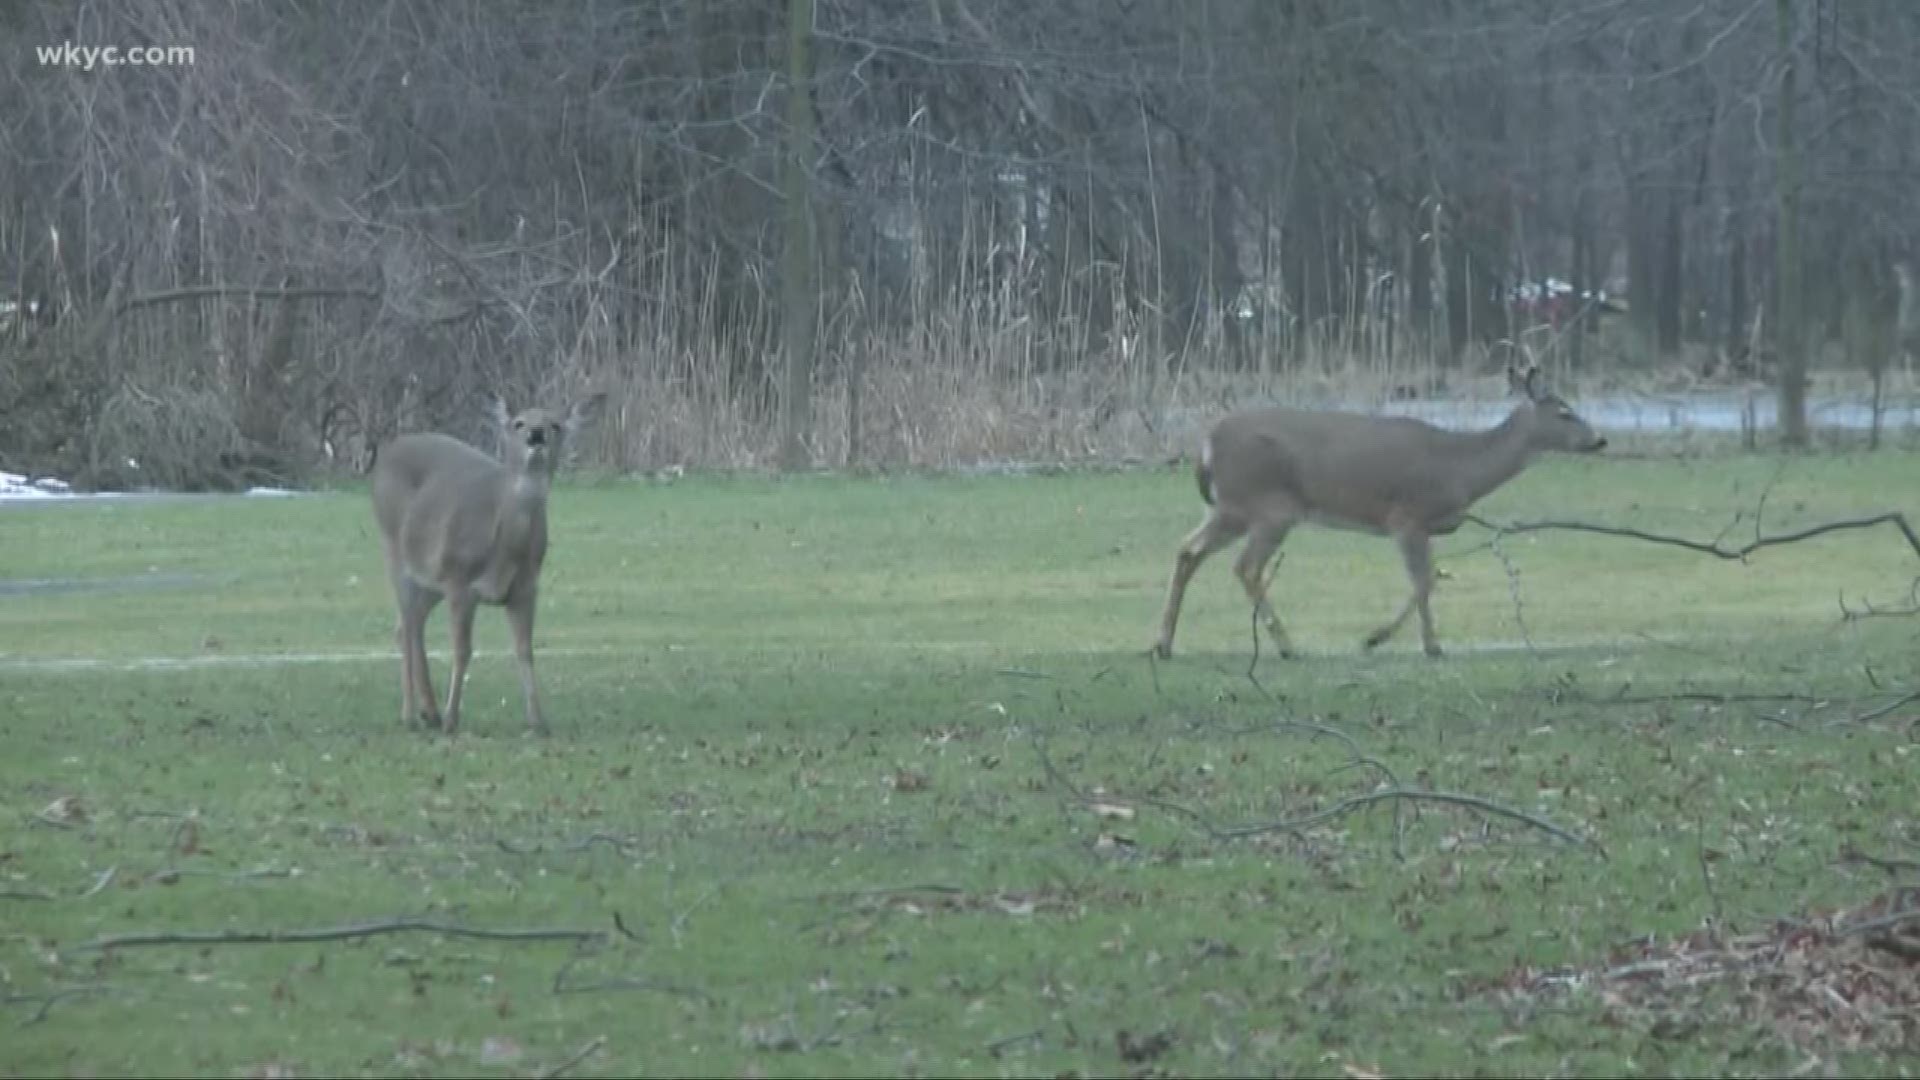 The city is making headway in dealing with deer overpopulation. Carl Bachtel reports.